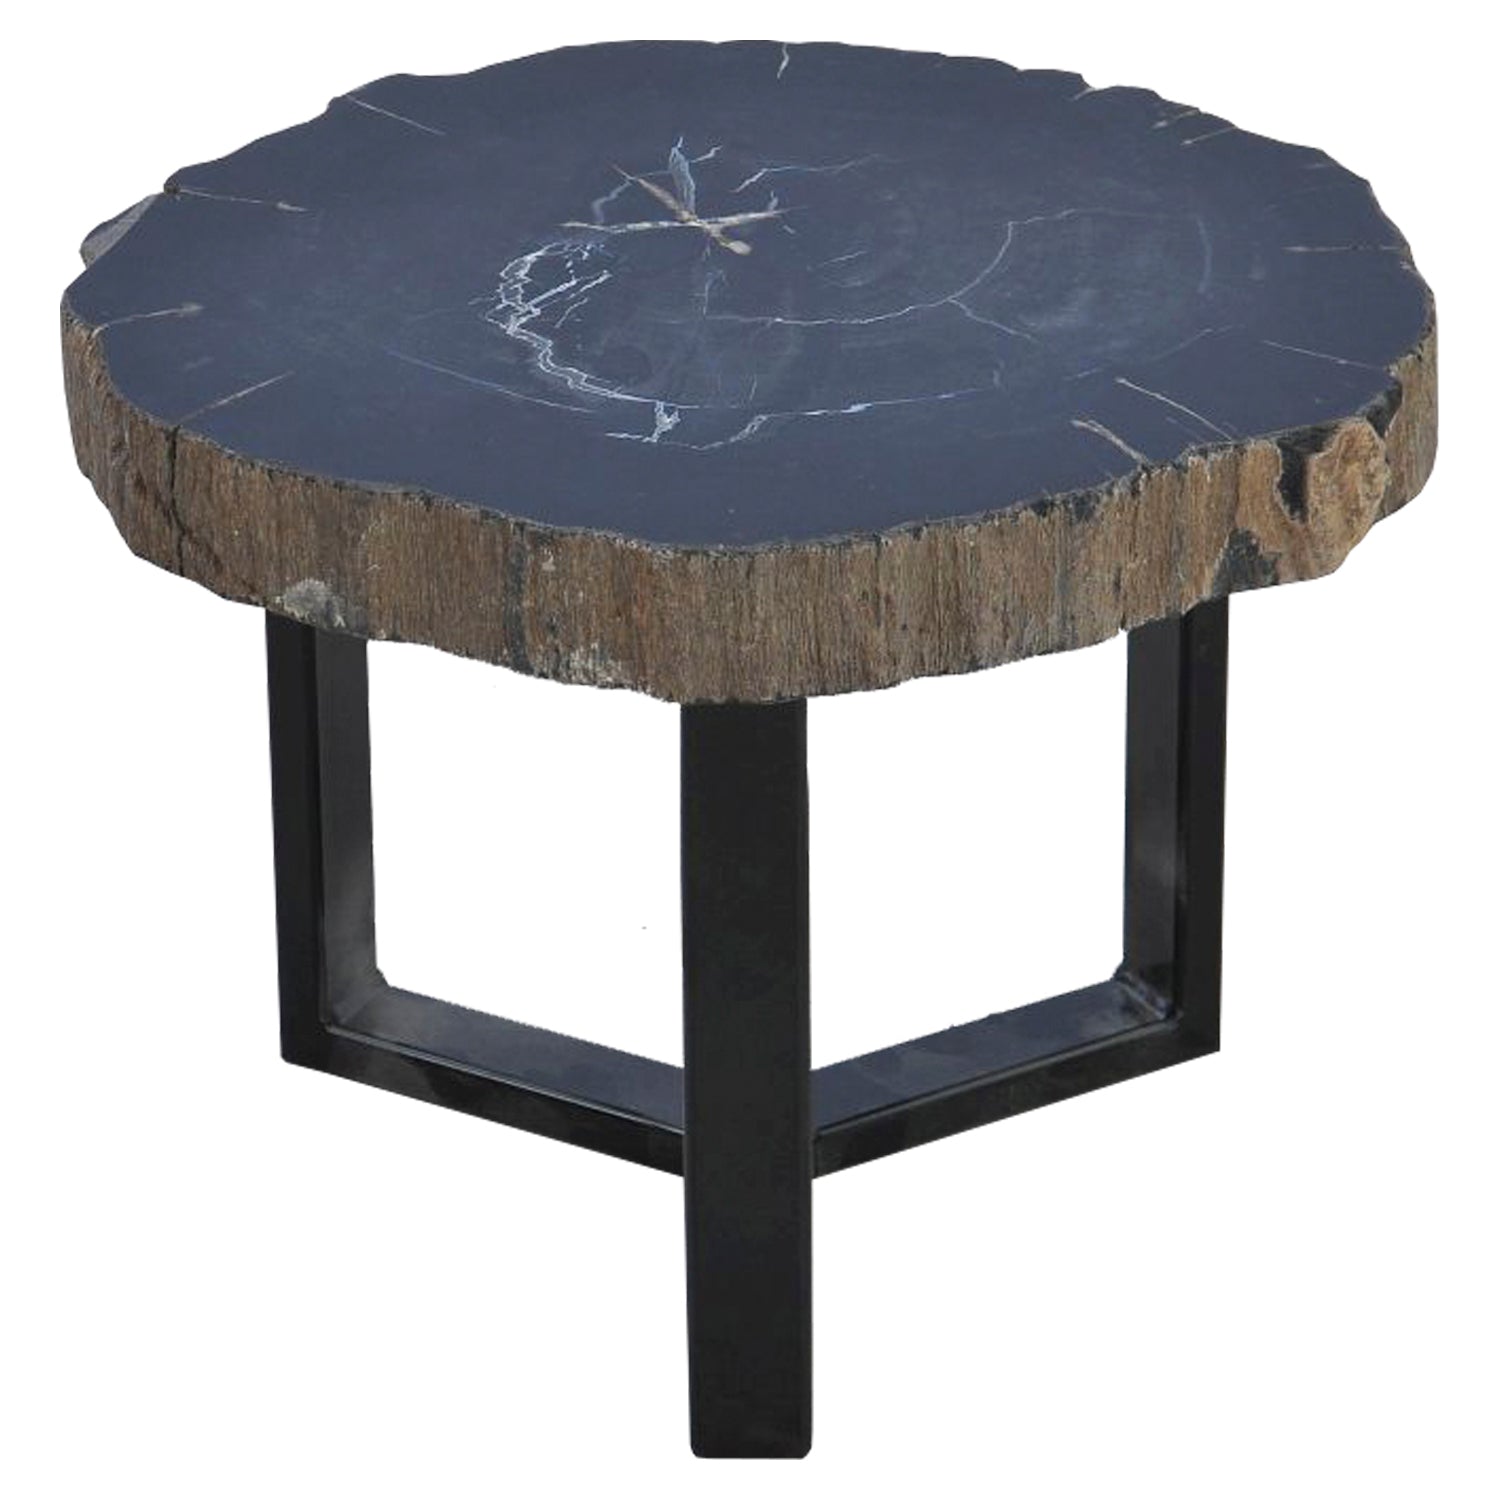 CONIC FOSSIL TABLE